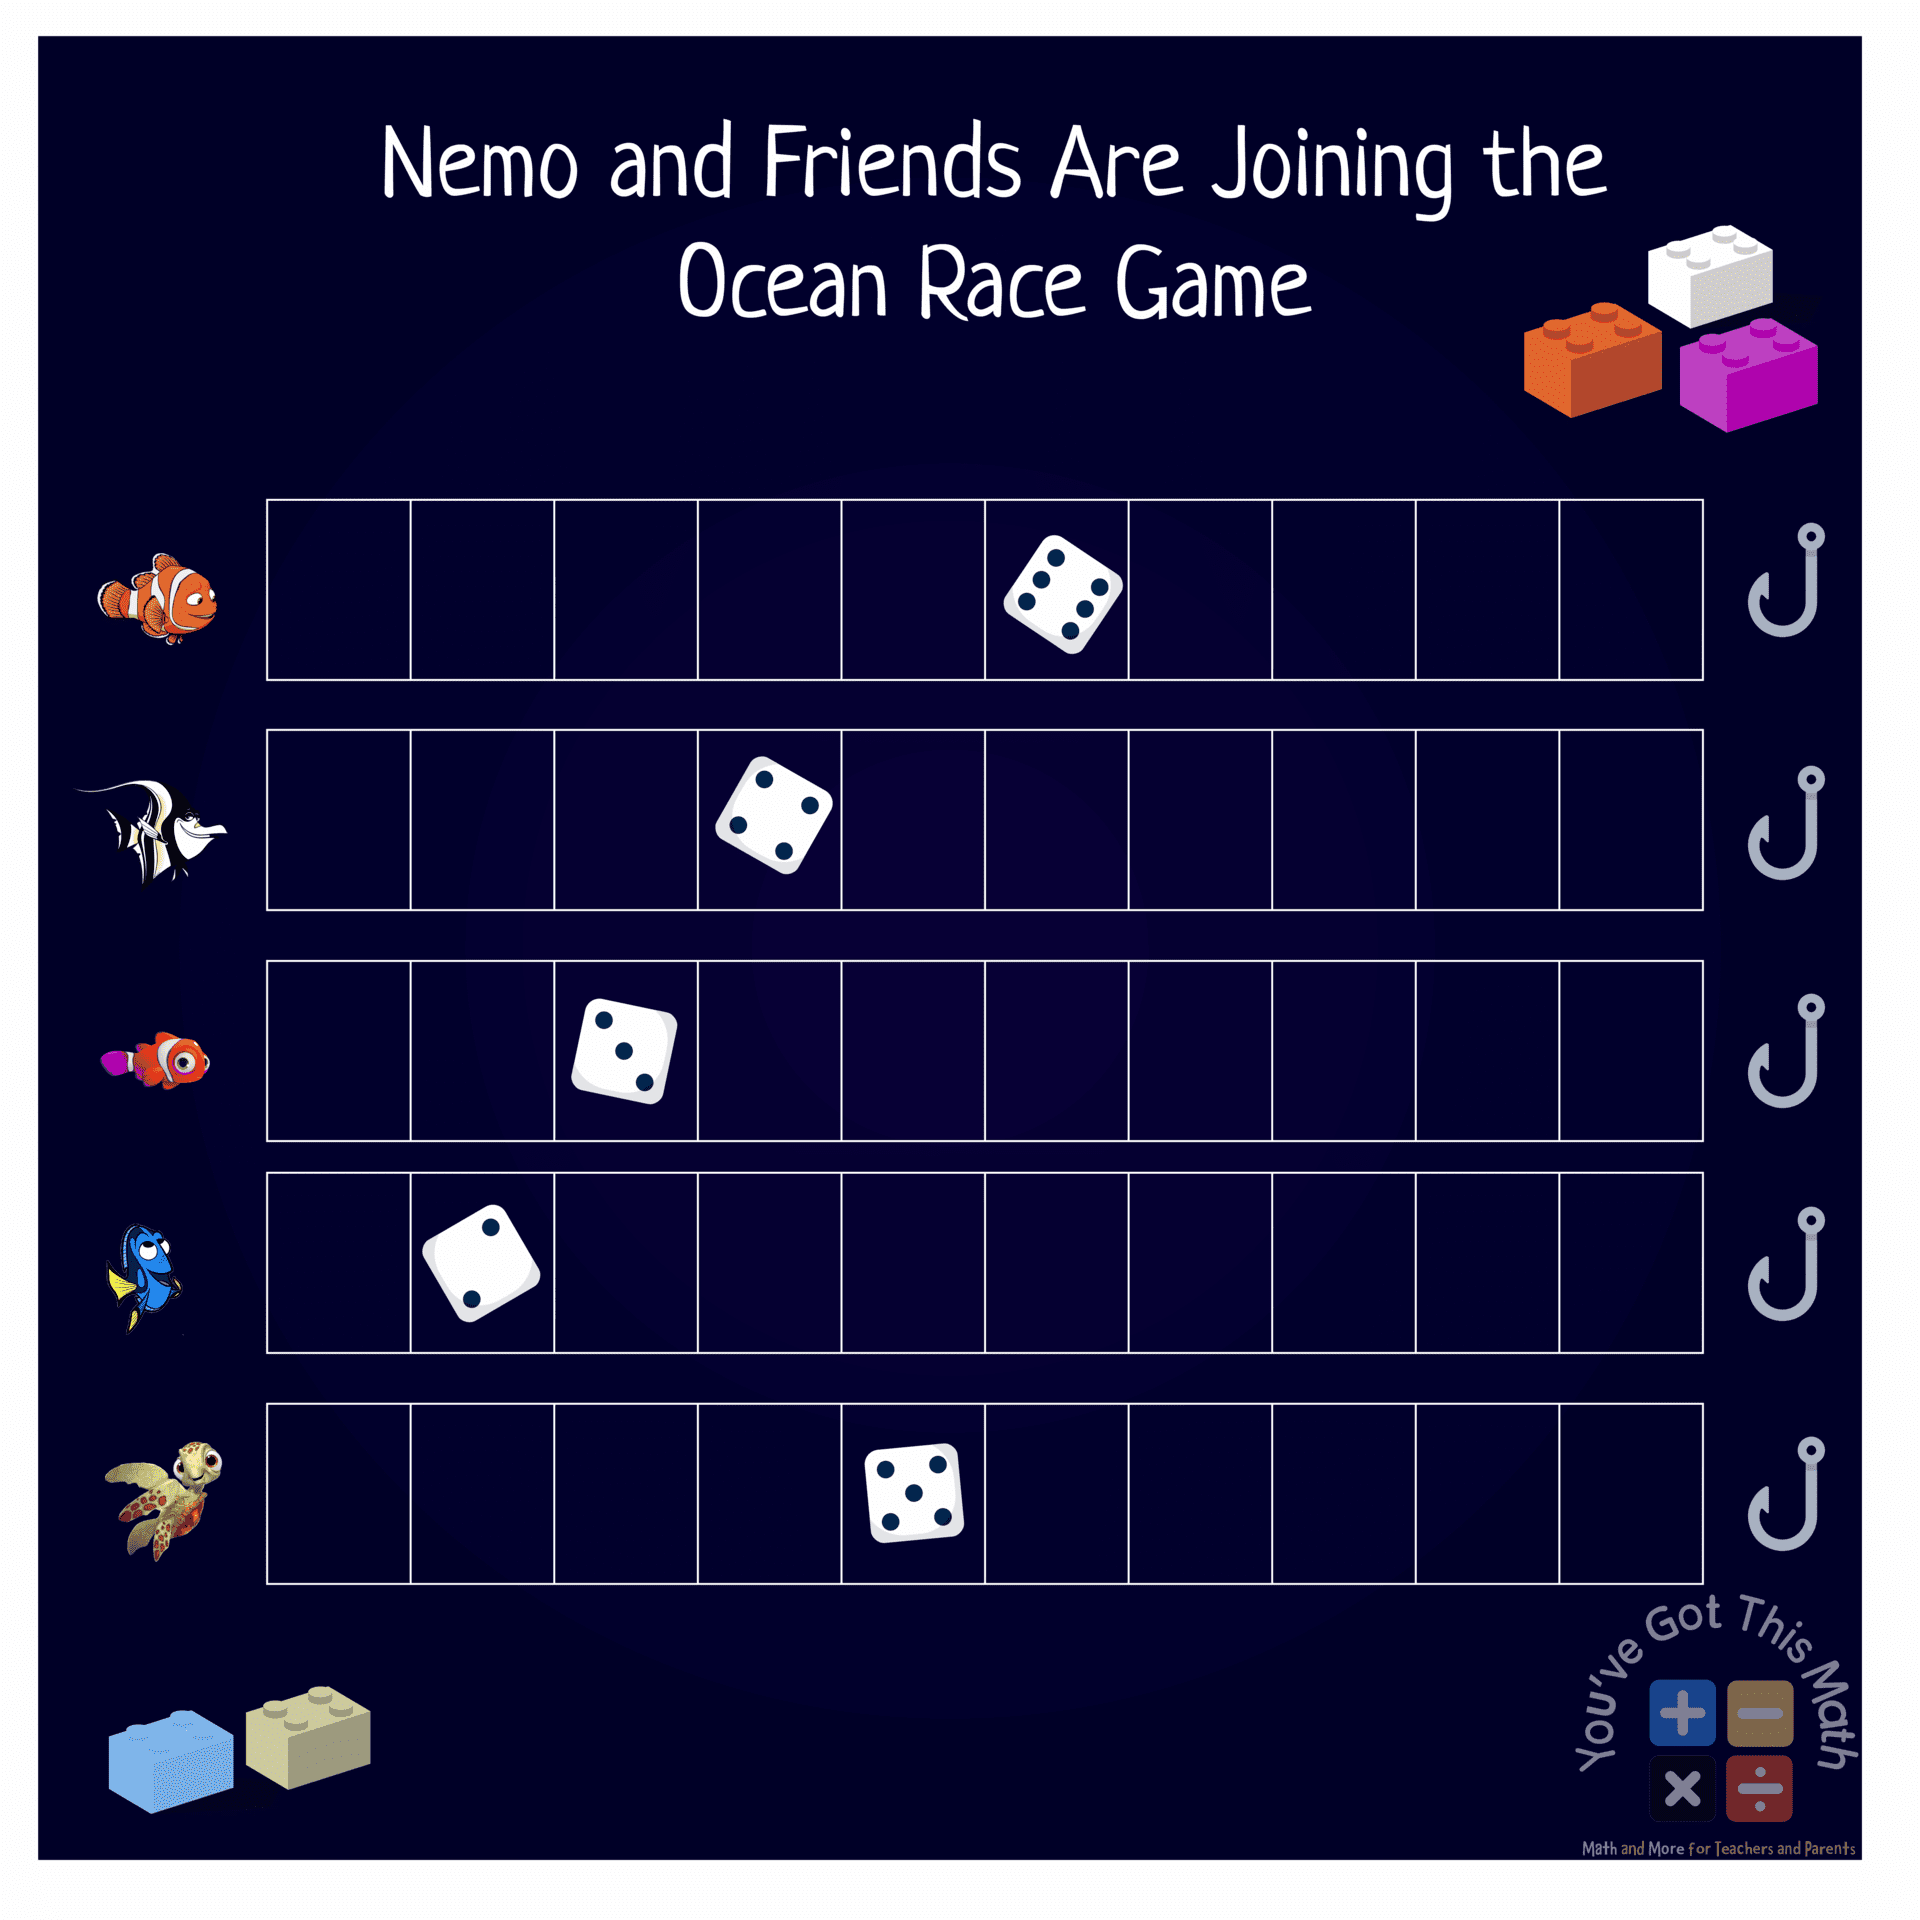 Nemo and Friends Are Joining the Ocean Race Game!